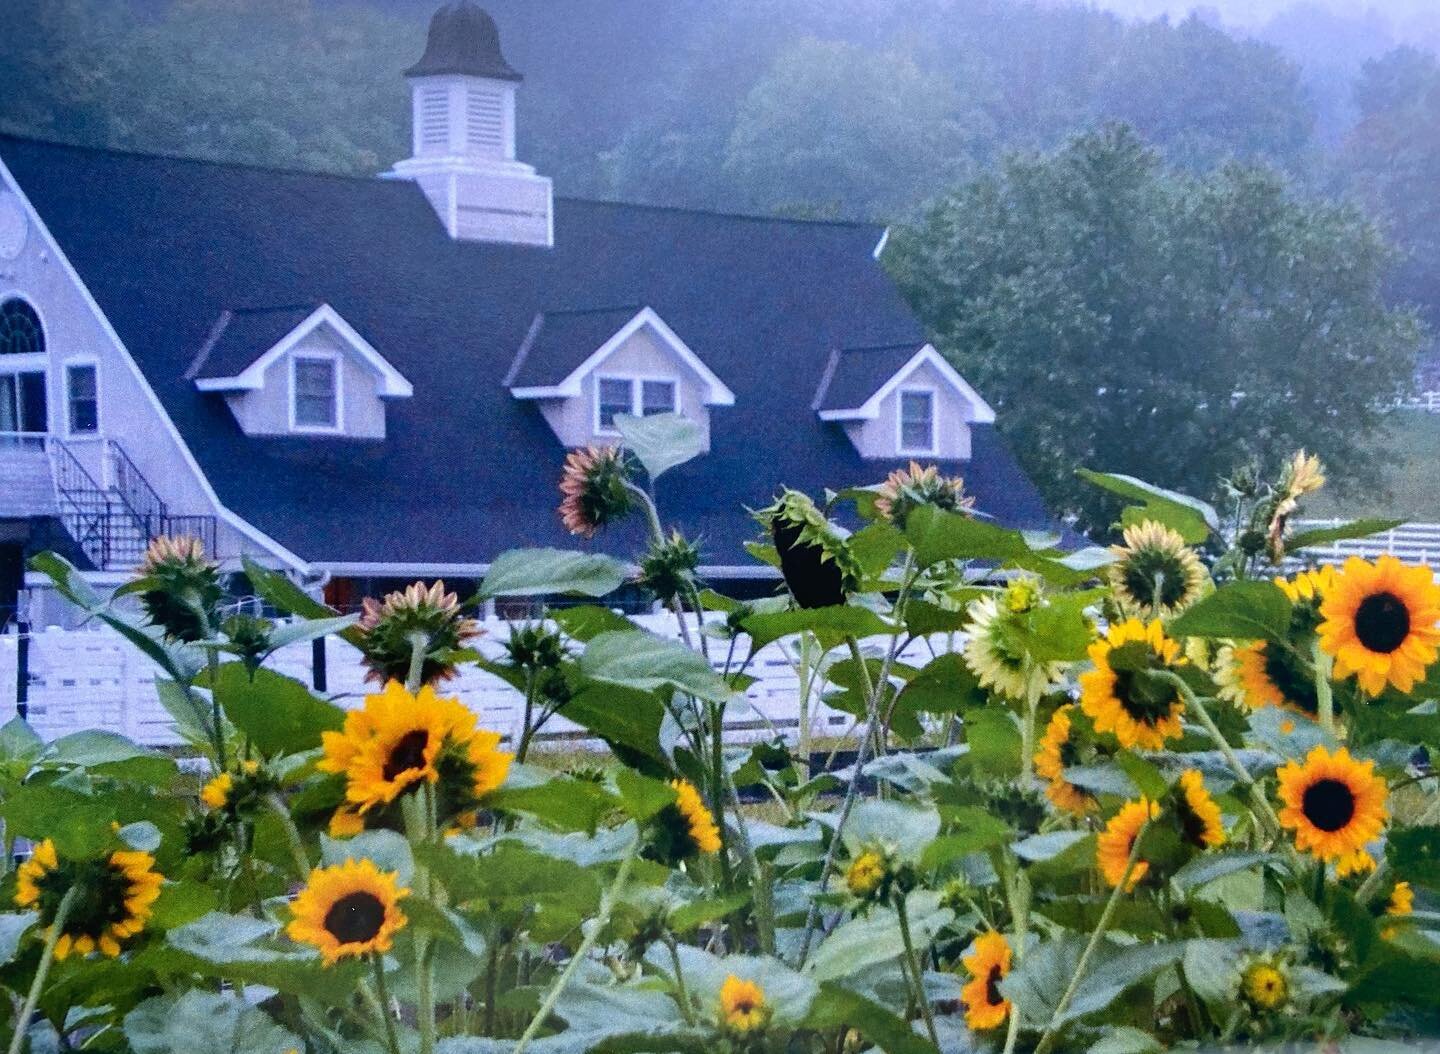 It&rsquo;s August and we realized we haven&rsquo;t shared our calendar photos from the past 🍑4 Months 🍑☺️

🍑 August: Sunflowers Over @ironhorseflowerfarm 📷: @thehomegrownstudio 
🍑 July: Sun over Wilbraham Country Club 📷: @peter_camyre 
🍑 July: